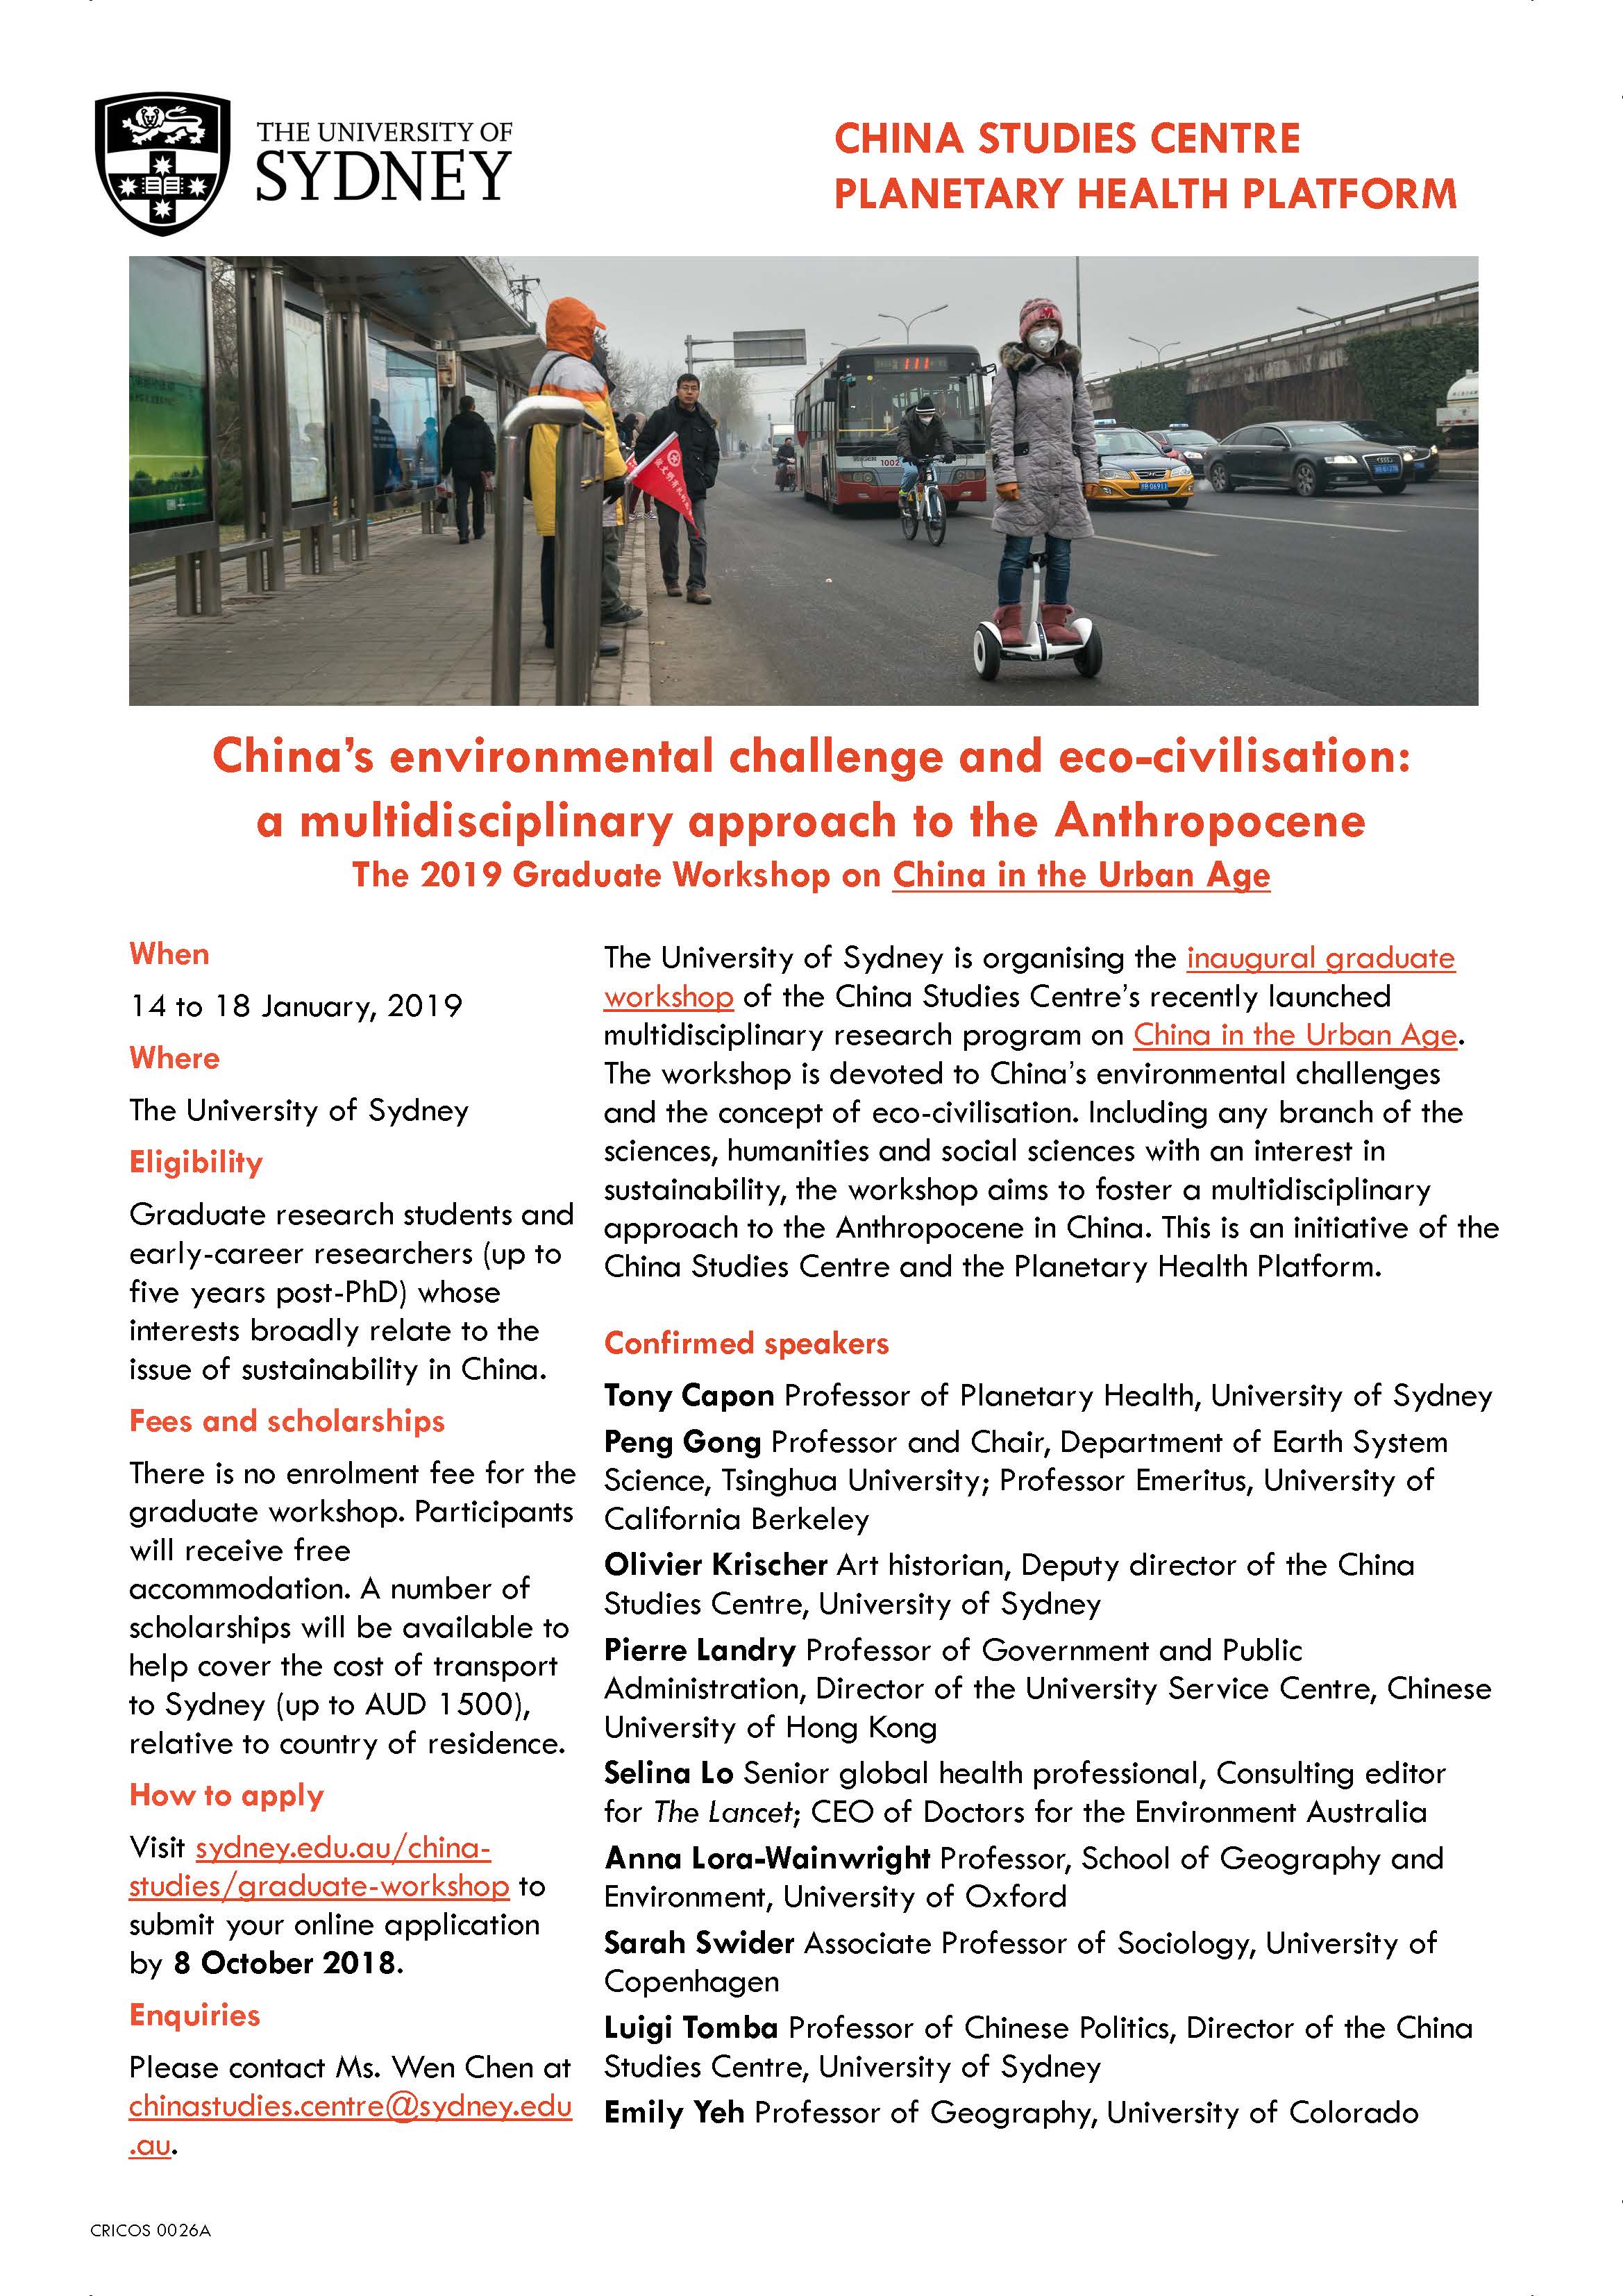 2019 Graduate Workshop on China in the urban age